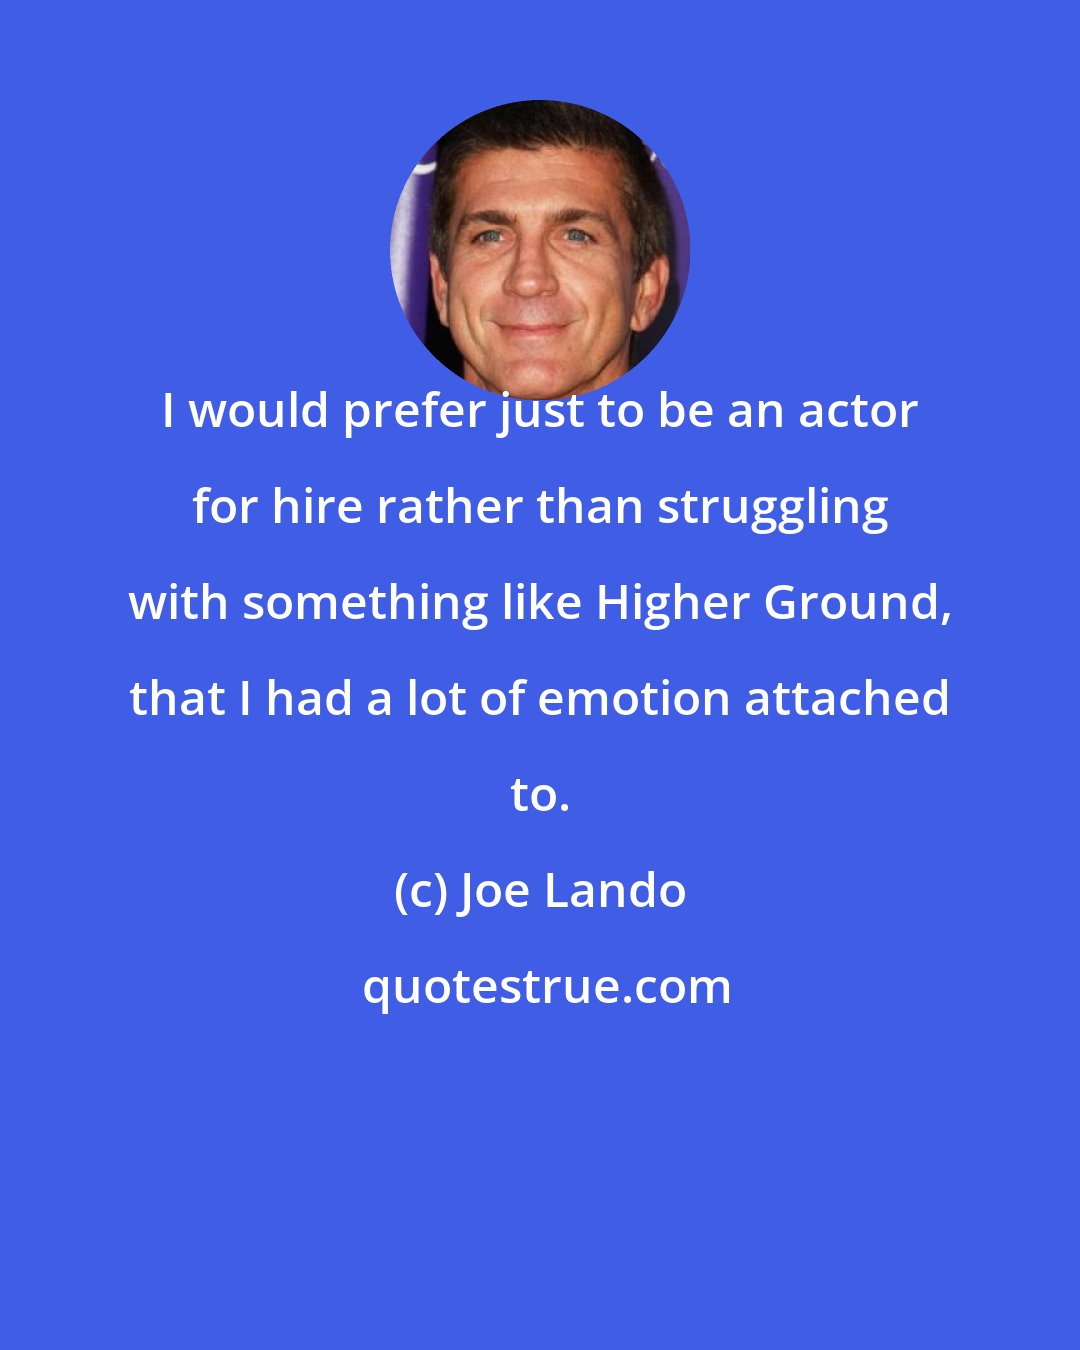 Joe Lando: I would prefer just to be an actor for hire rather than struggling with something like Higher Ground, that I had a lot of emotion attached to.